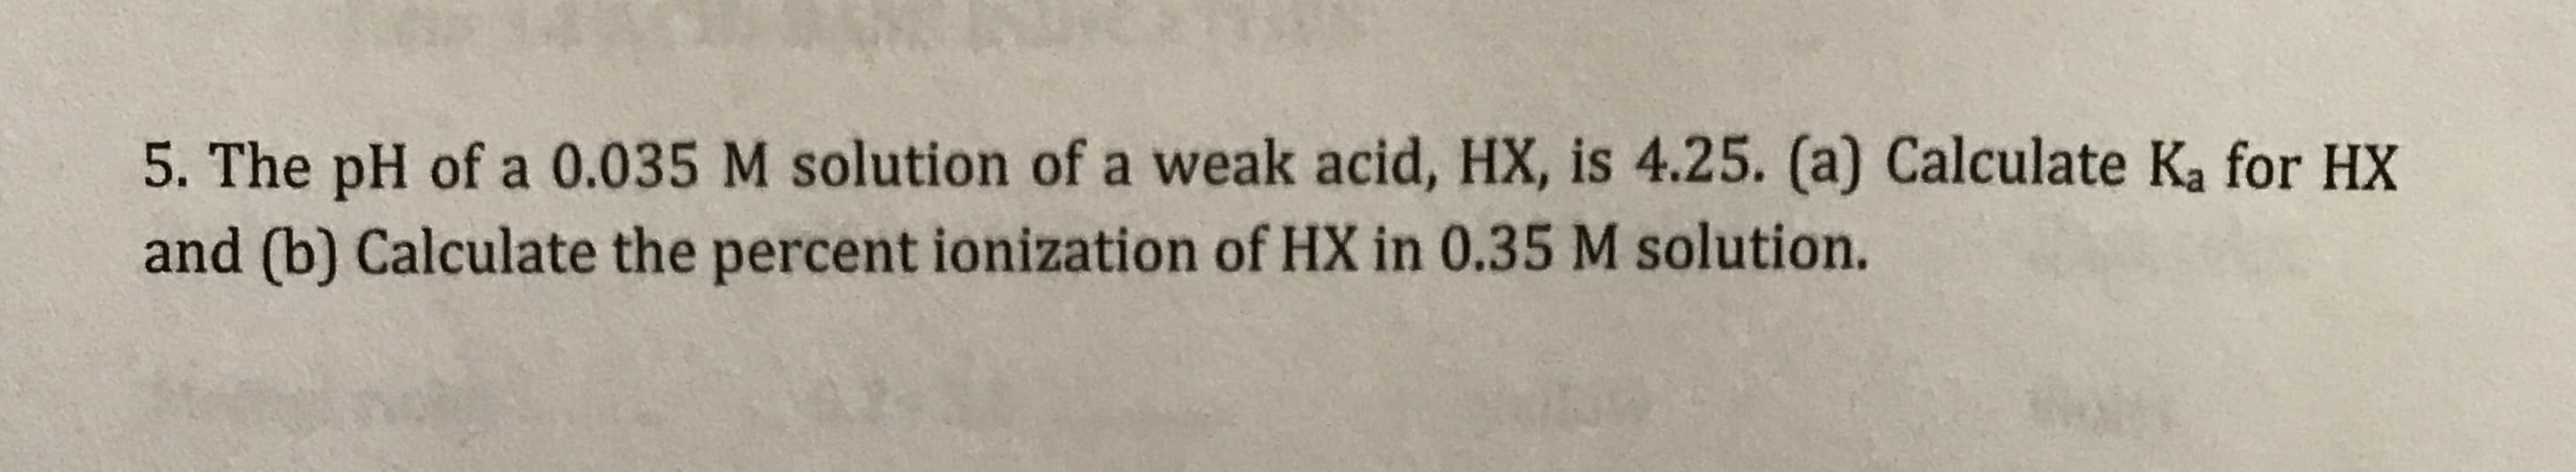 5. The pH of a 0.035 M solution of a weak acid, HX, is 4.25. (a) Calculate Ka for HX
and (b) Calculate the percent ionization of HX in 0.35 M solution.
